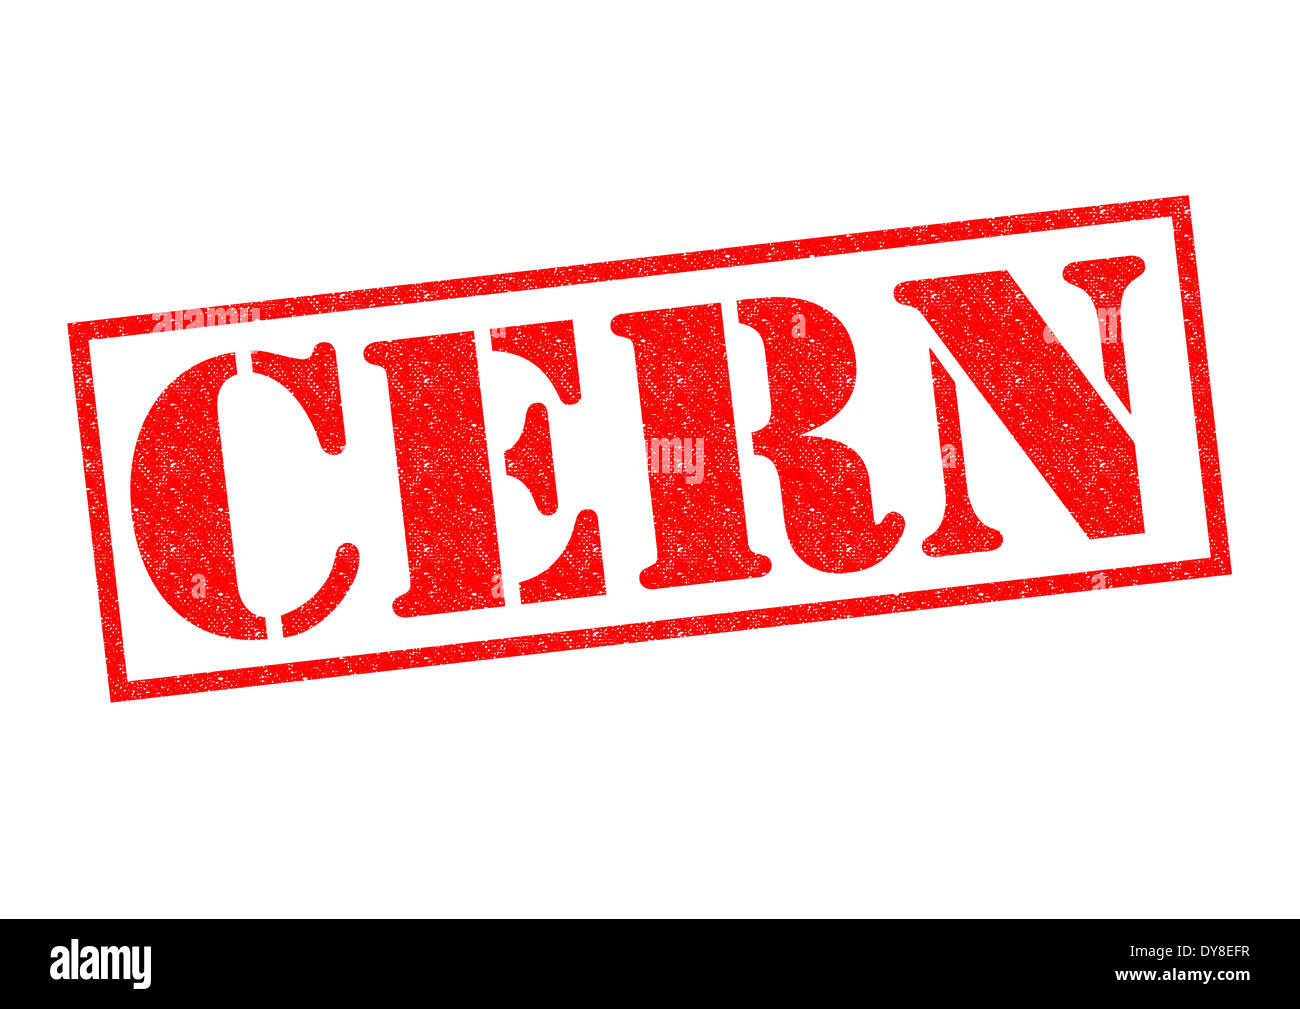 CERN red Rubber Stamp over a white background. Stock Photo